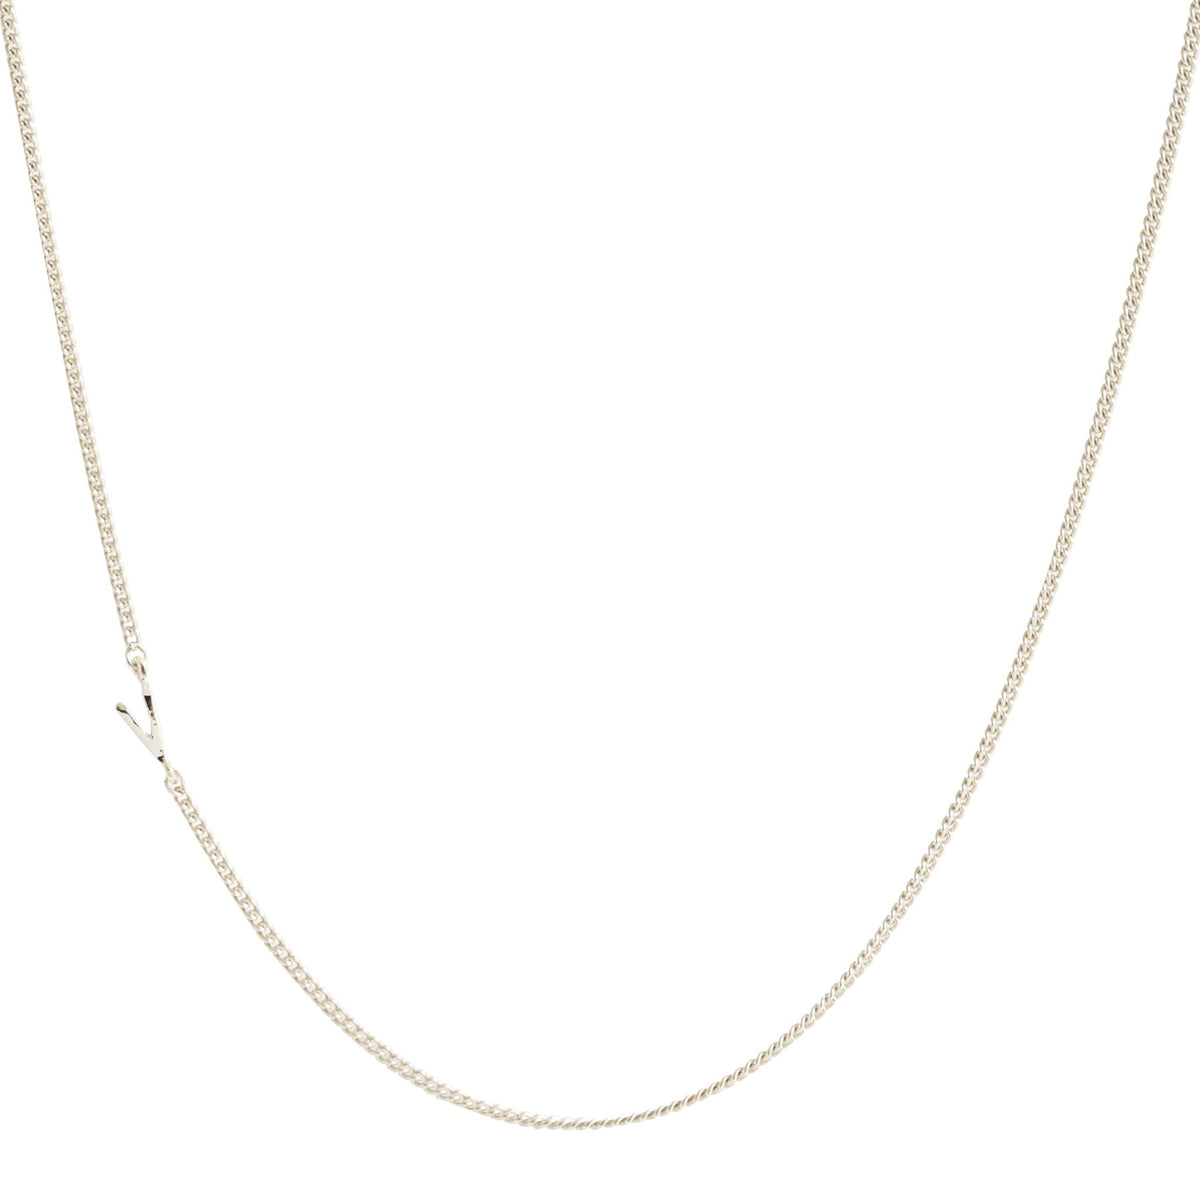 NOTABLE OFFSET INITIAL NECKLACE - V - GOLD, ROSE GOLD, OR SILVER - SO PRETTY CARA COTTER